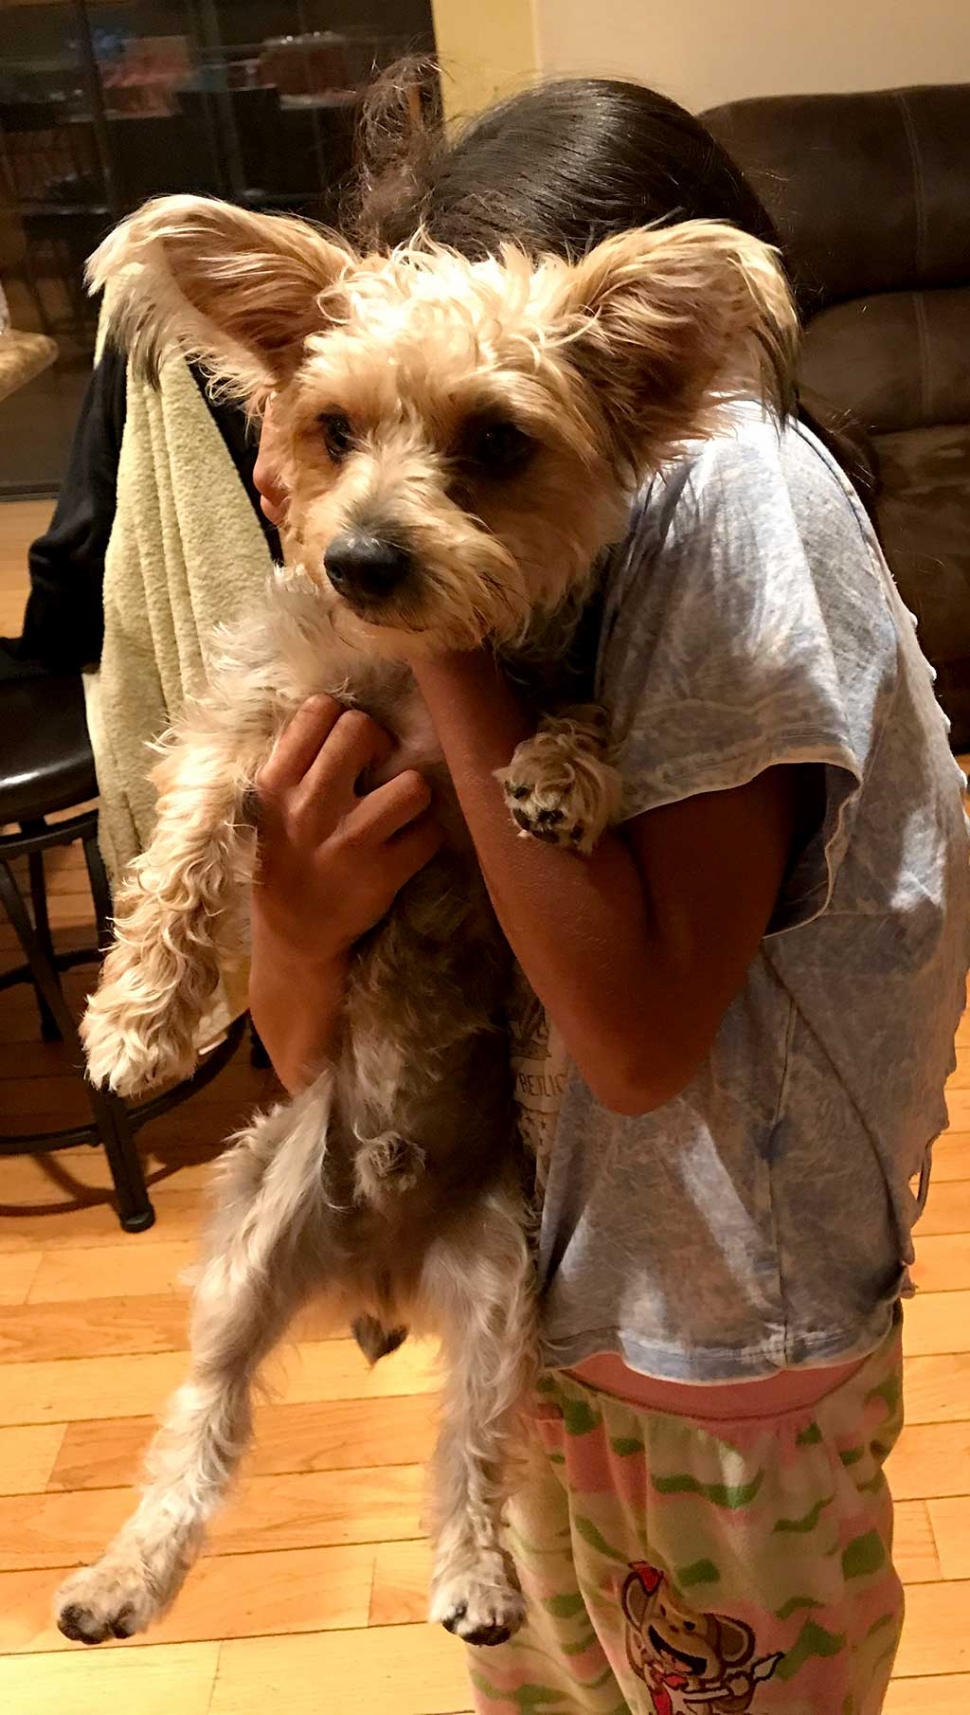 My name is Tiggy. I got lost right after I was bathed. I left before my owner put my collar on, so I don’t have my dog identification on me. Please contact 805-830-3775 or 805-223-1578. $$$ REWARD IF FOUND.